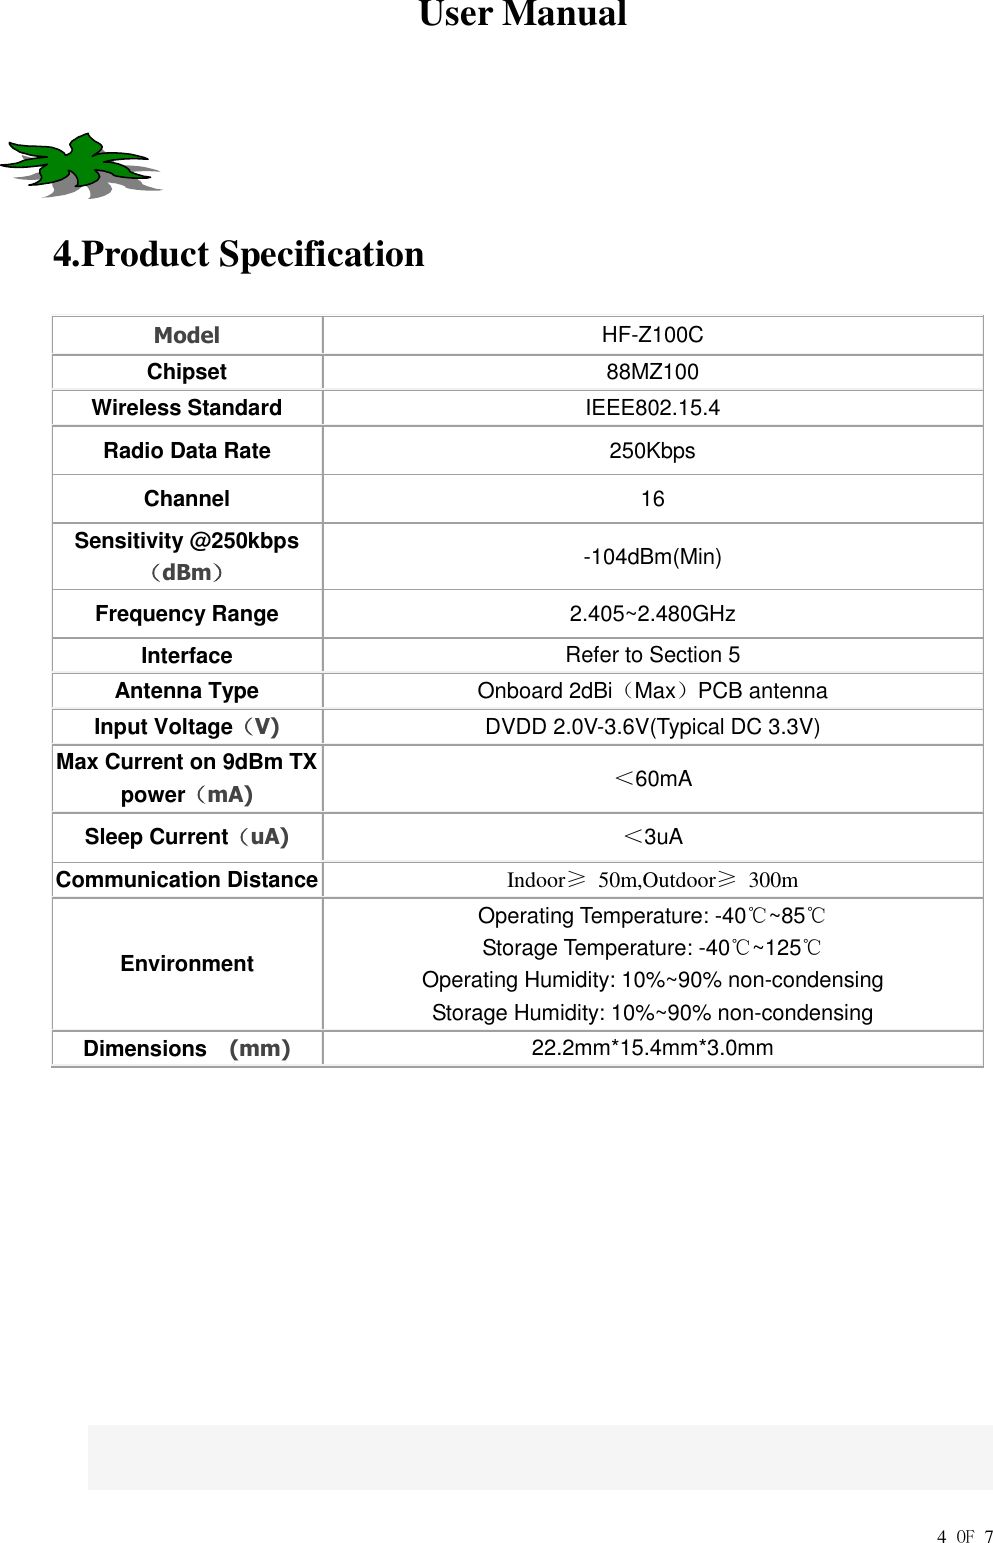  User Manual        4 OF 7    4.Product Specification Model HF-Z100C Chipset 88MZ100 Wireless Standard IEEE802.15.4 Radio Data Rate 250Kbps   Channel 16 Sensitivity @250kbps（dBm） -104dBm(Min) Frequency Range 2.405~2.480GHz Interface Refer to Section 5 Antenna Type Onboard 2dBi（Max）PCB antenna Input Voltage（V) DVDD 2.0V-3.6V(Typical DC 3.3V) Max Current on 9dBm TX power（mA) ＜60mA Sleep Current（uA) ＜3uA Communication Distance Indoor≥  50m,Outdoor≥  300m Environment Operating Temperature: -40℃~85℃ Storage Temperature: -40℃~125℃ Operating Humidity: 10%~90% non-condensing Storage Humidity: 10%~90% non-condensing Dimensions    (mm) 22.2mm*15.4mm*3.0mm          